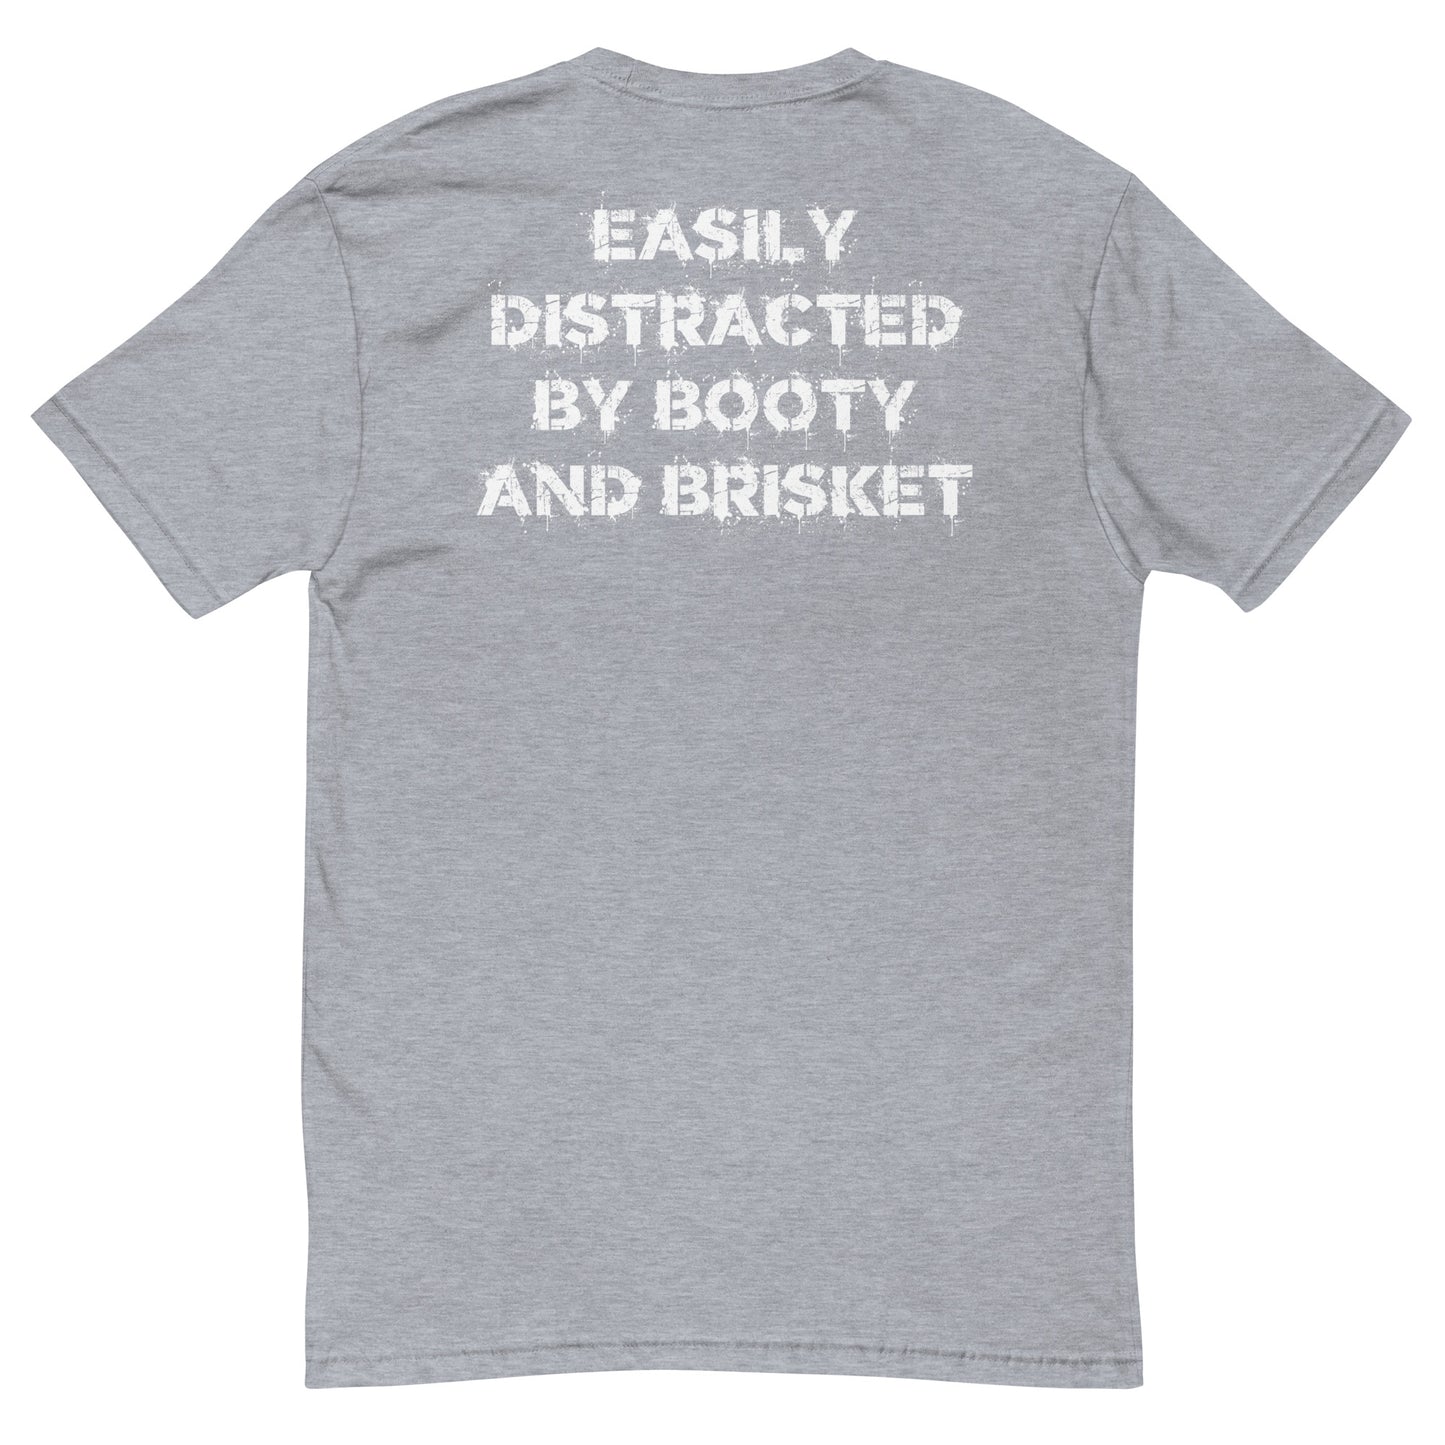 Easily Distracted V.2 T-shirt